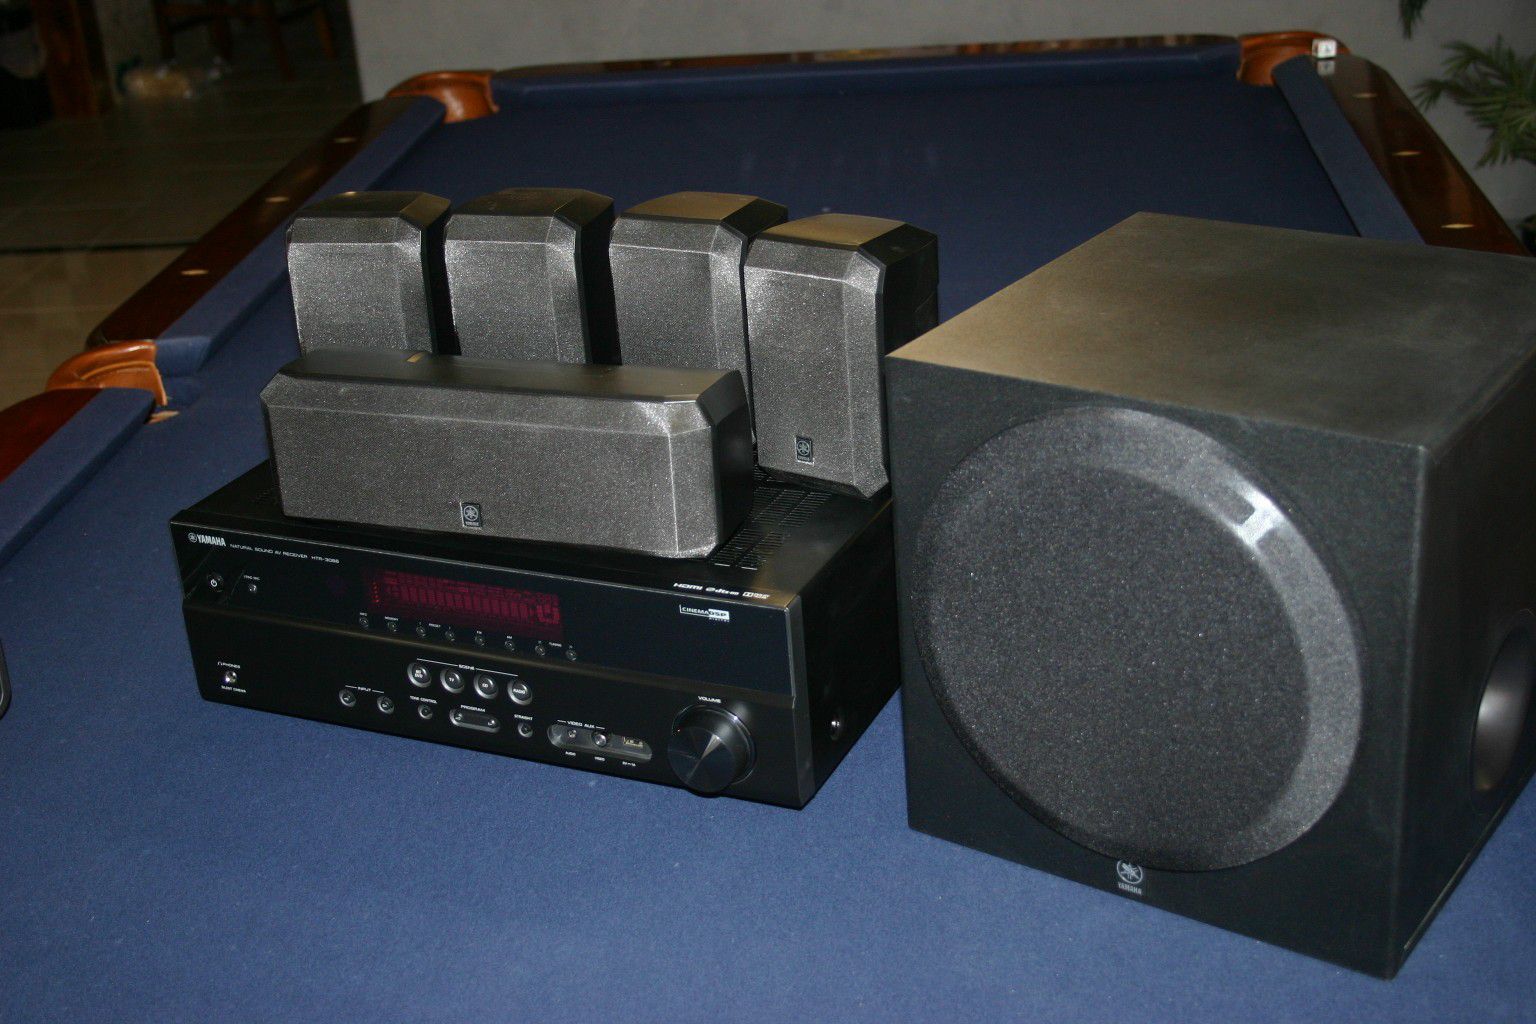 Yamaha HTR 3066 5.1 Channel Receiver, Speakers & Mounting Hardware